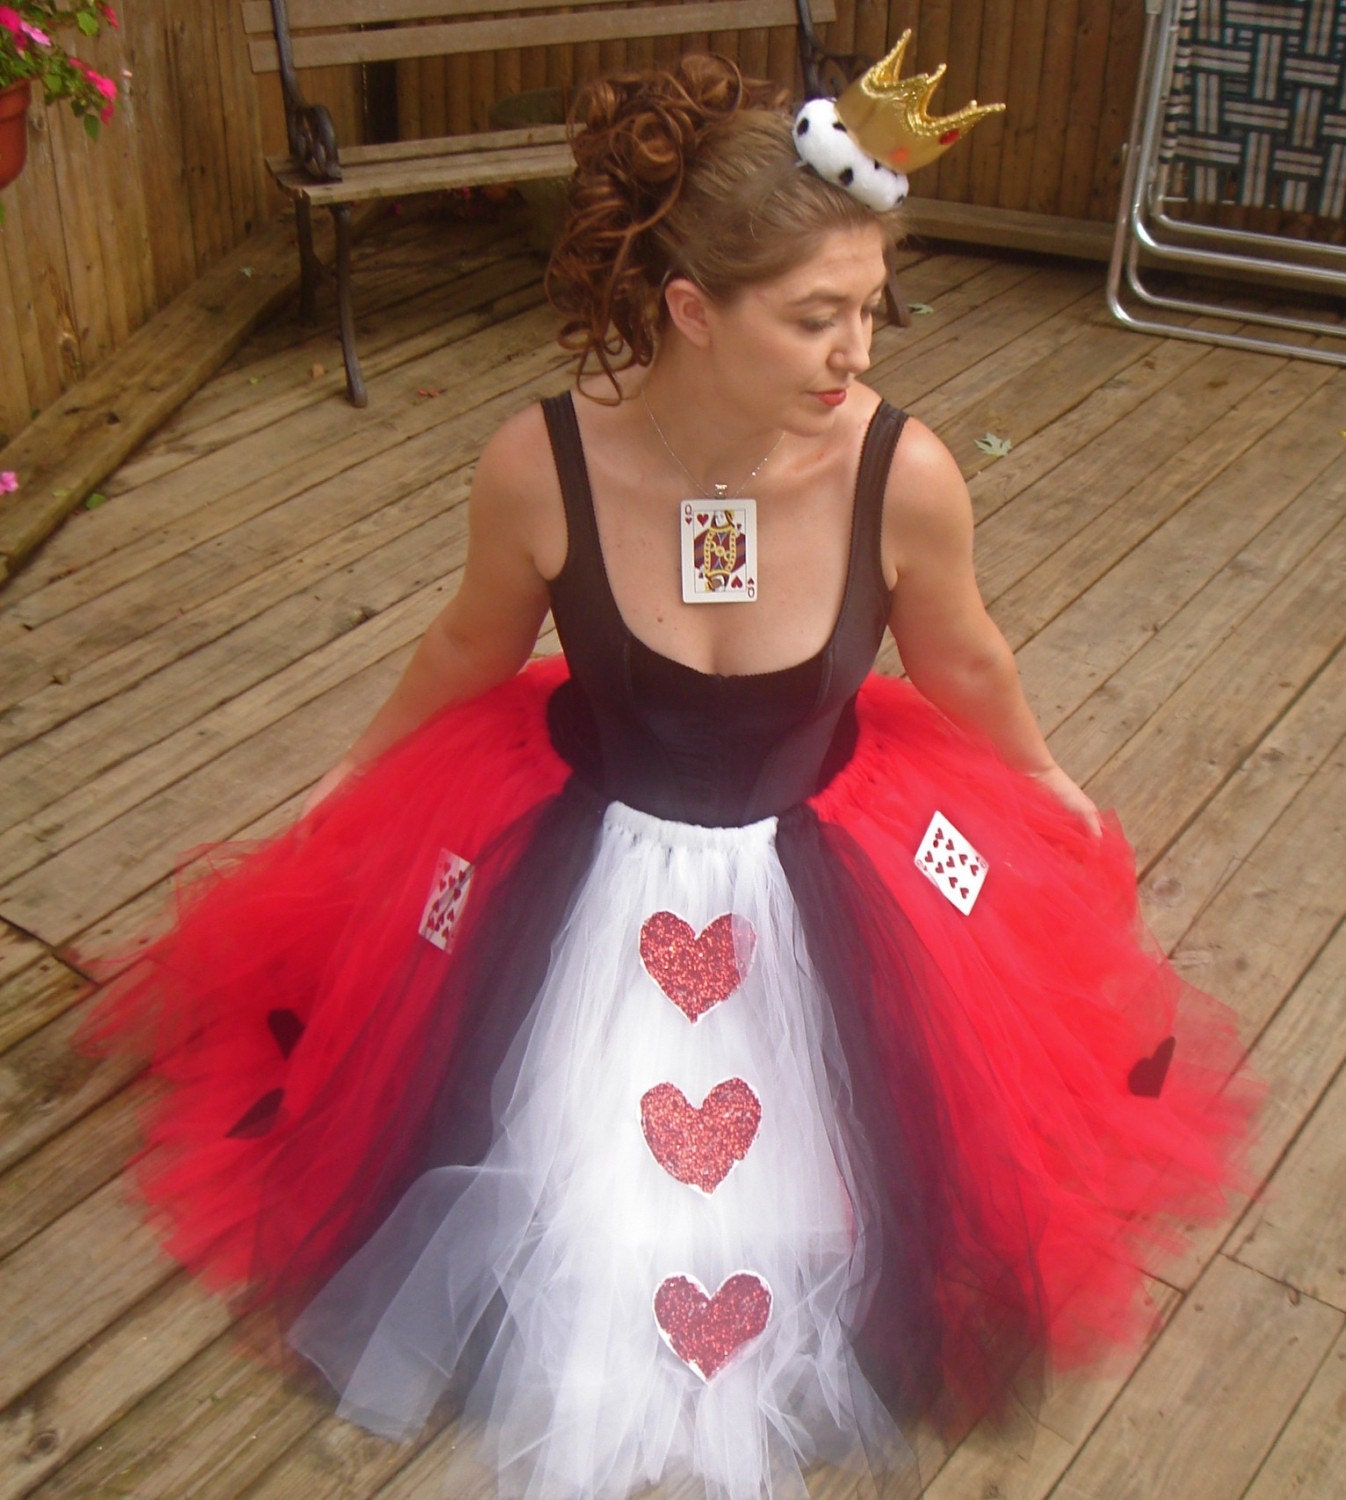 Queen of Hearts  Adult Boutique Tutu Skirt Costume